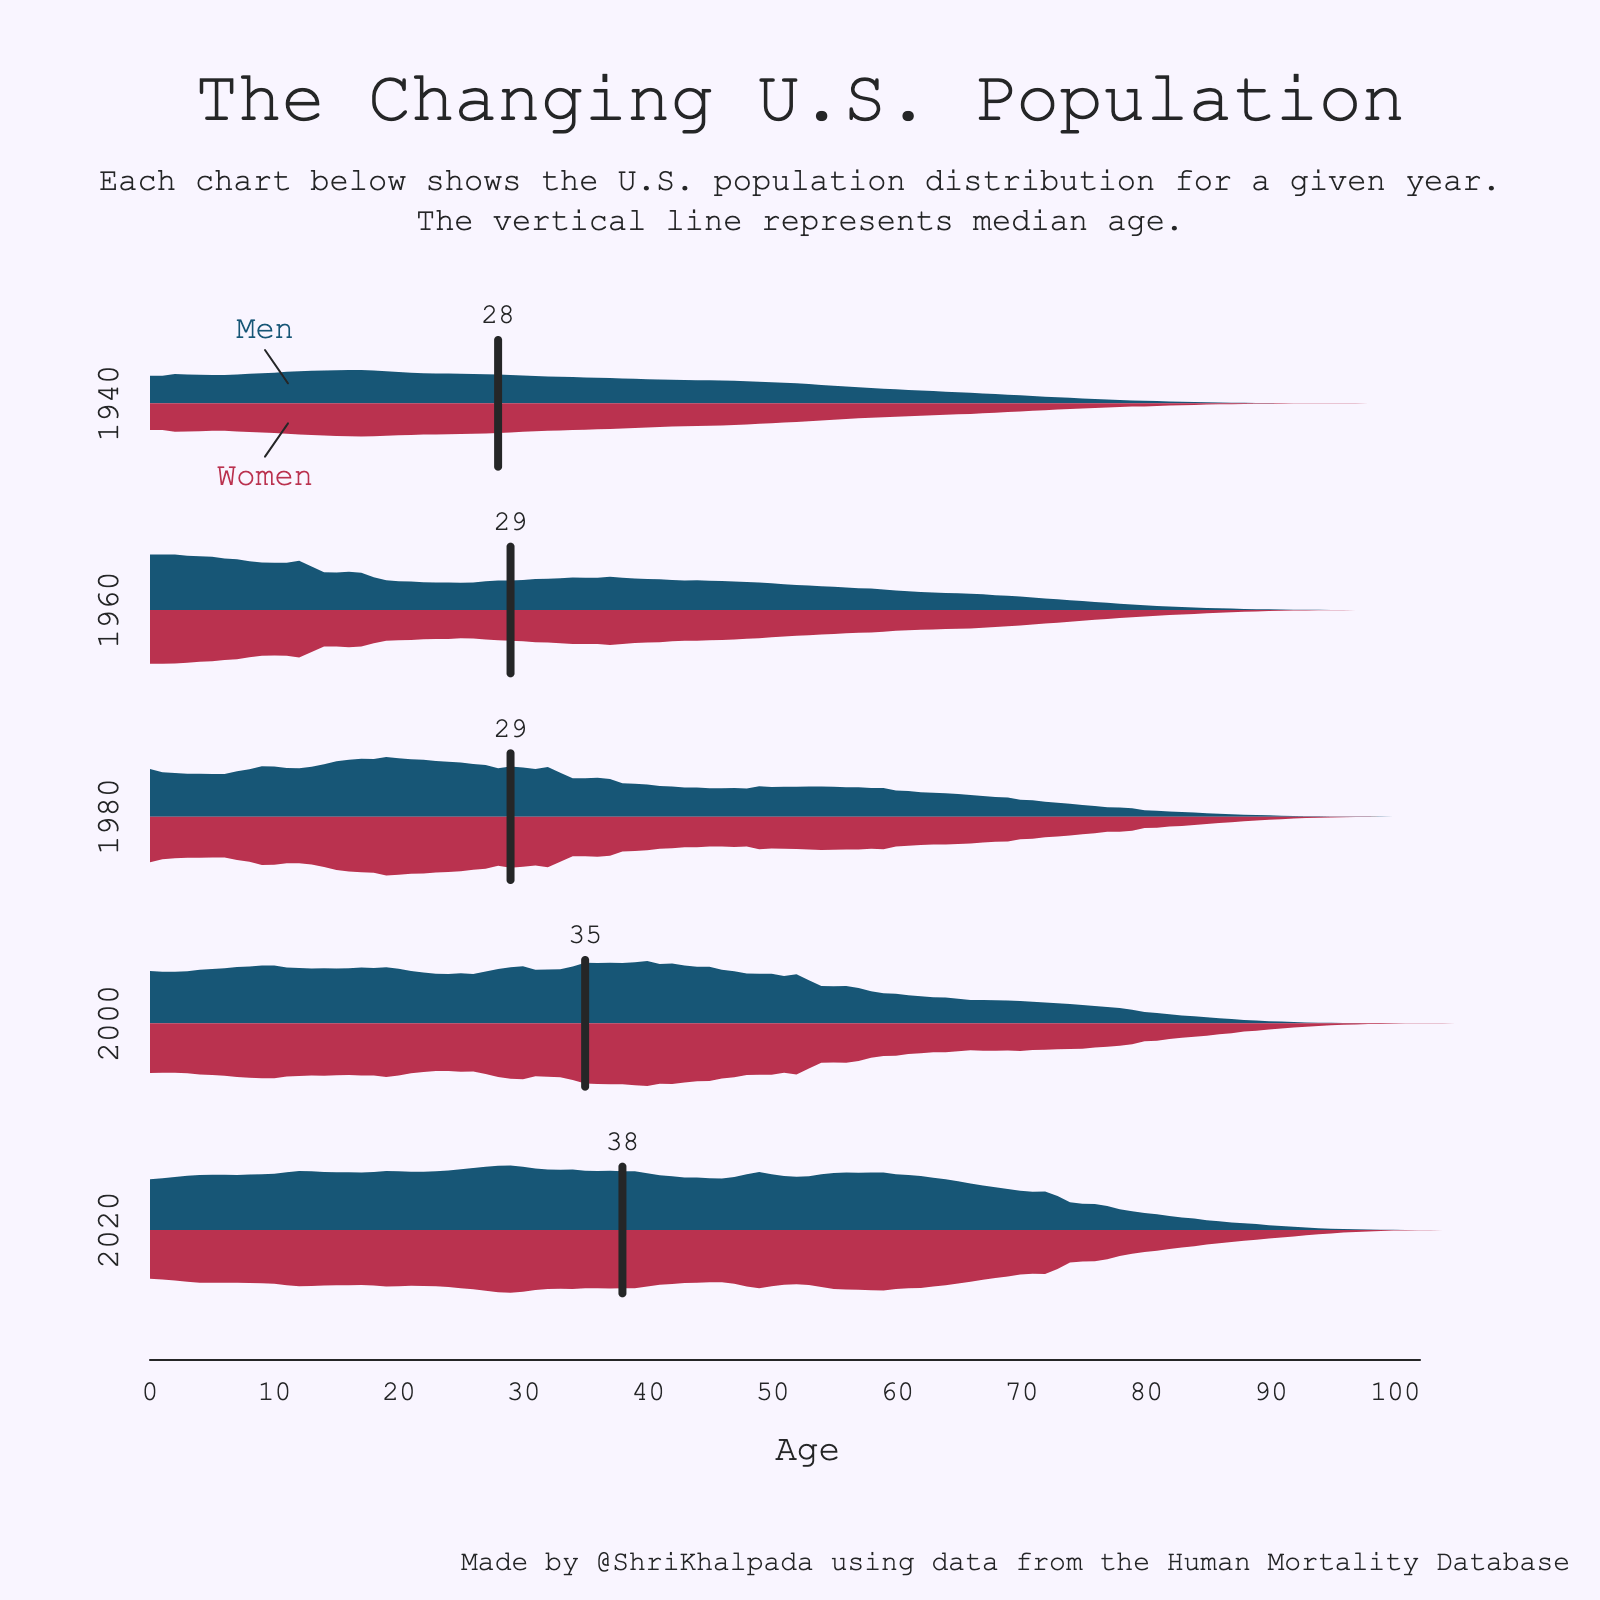 A set of population distribution graphs titled "The Changing U.S. Population" showing shifts in age demographics over time with median ages indicated for both men and women in the U.S. for selected years.